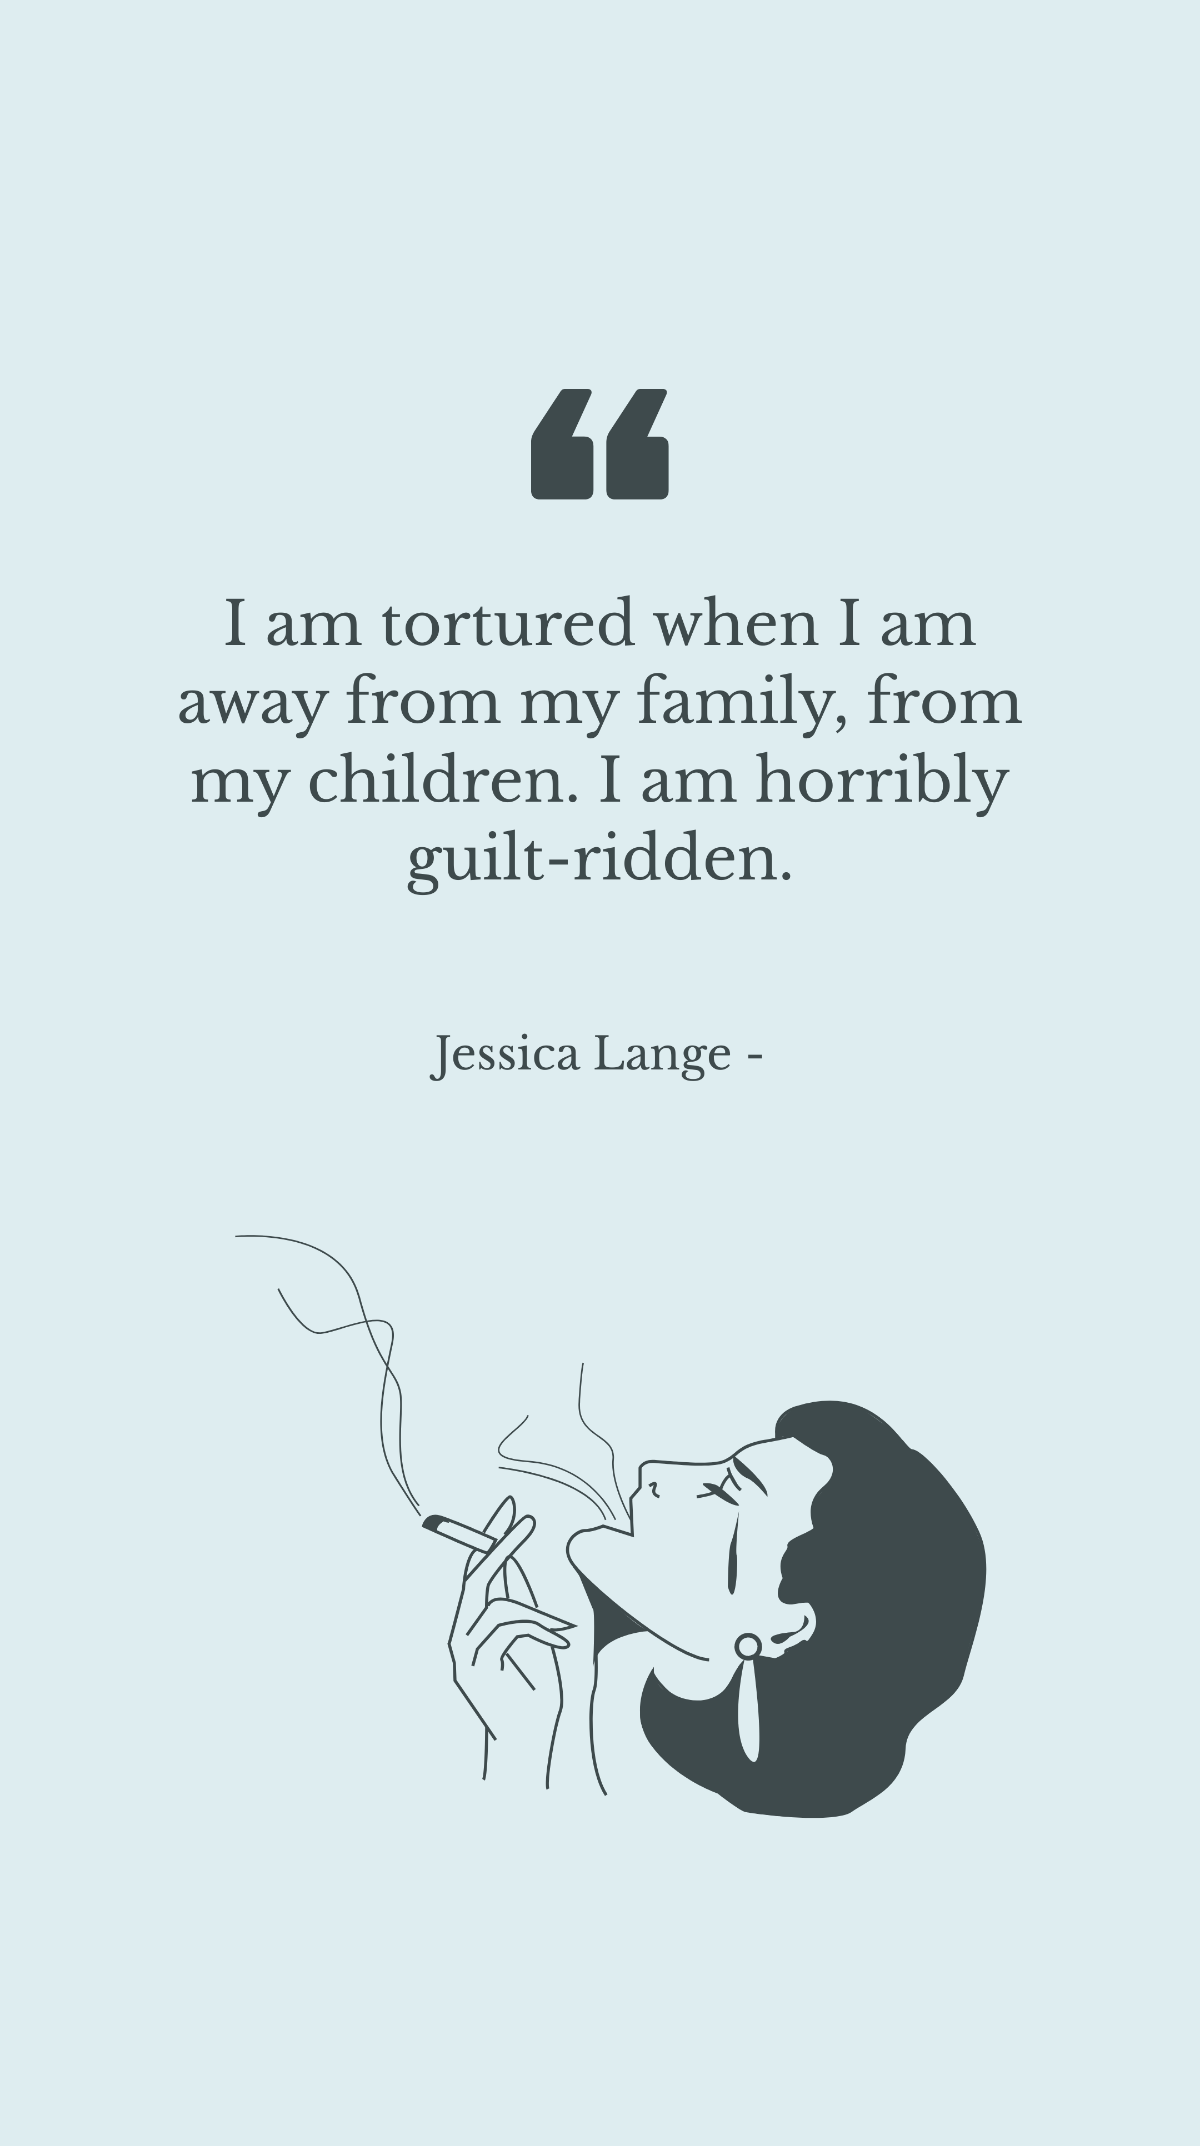 Jessica Lange - I am tortured when I am away from my family, from my children. I am horribly guilt-ridden. Template